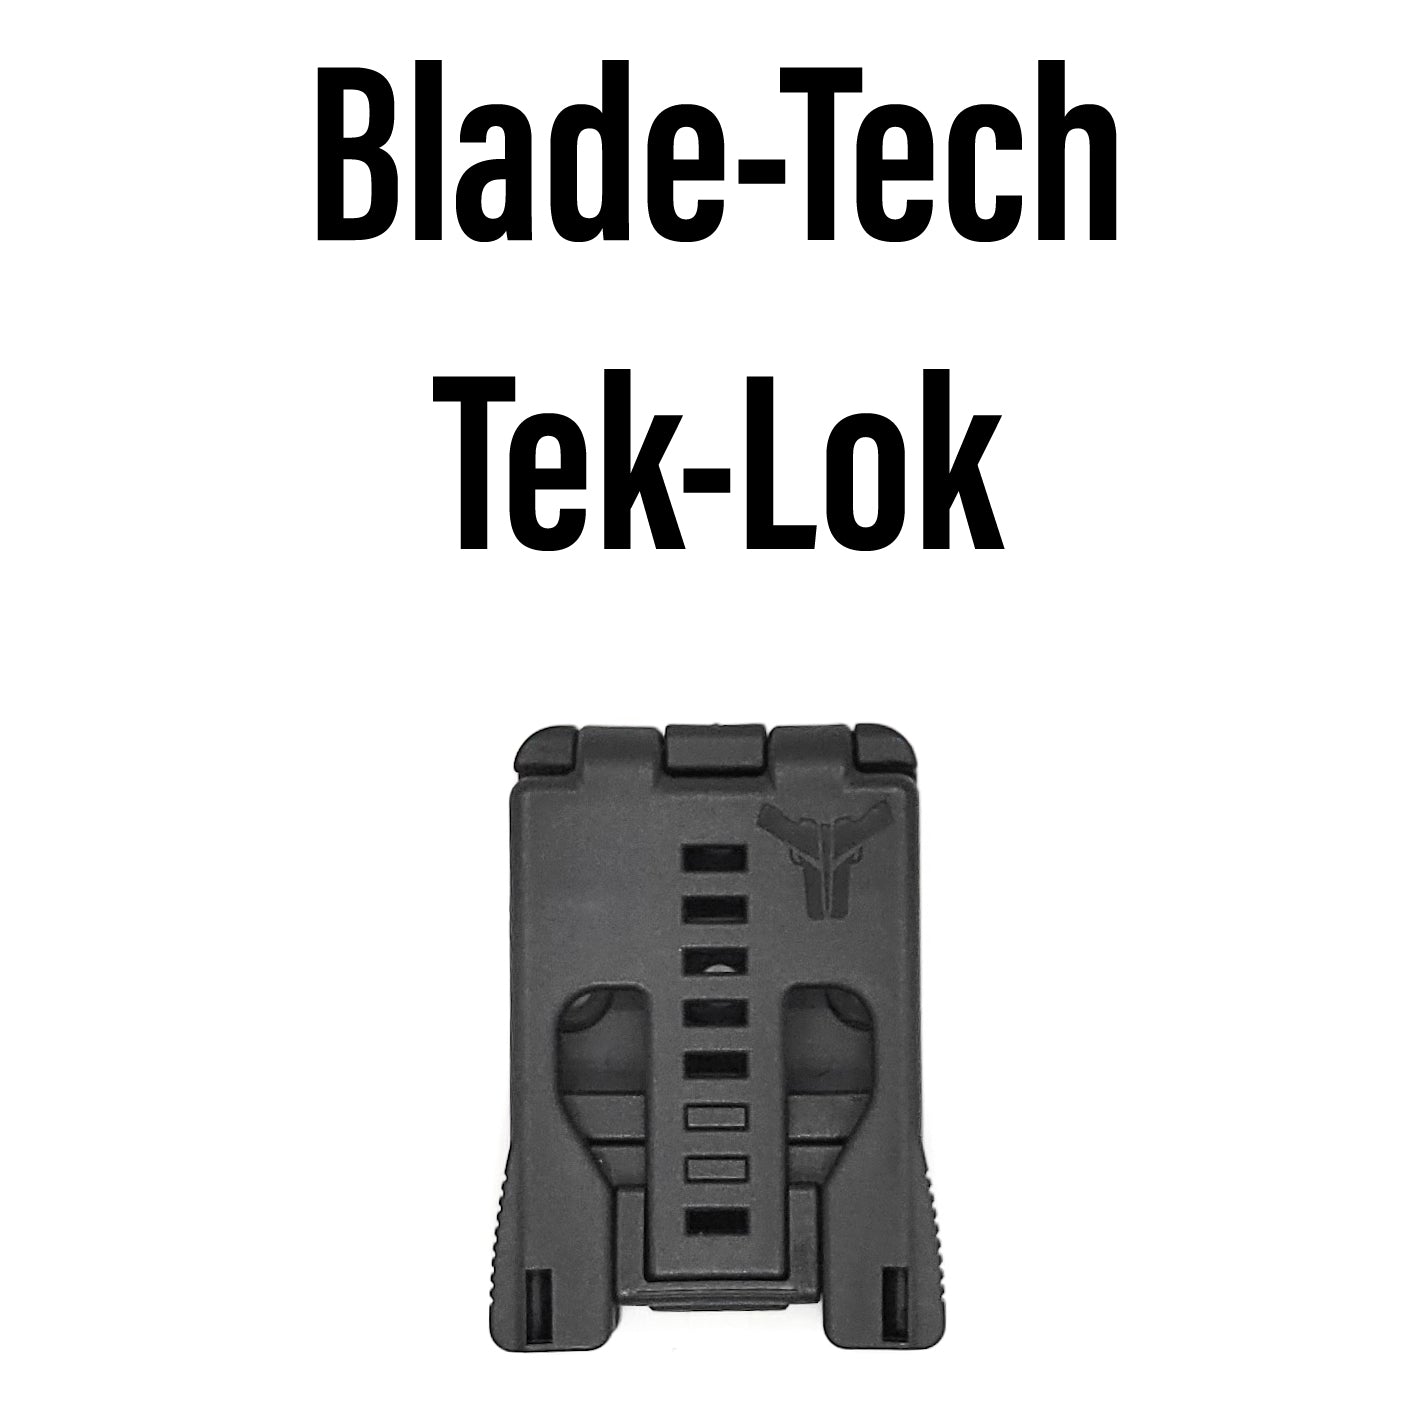 For the best Outside Waistband OWB Kydex Holster designed to fit the Glock 43X MOS, 48 MOS, 43X Rail, and 48 Rail pistols with Streamlight TLR-8 Sub, shop Four Brothers Holsters. Full sweat guard, adjustable retention, smooth edges to reduce printing. Made in the USA. Open muzzle and cleared for red dot sights.